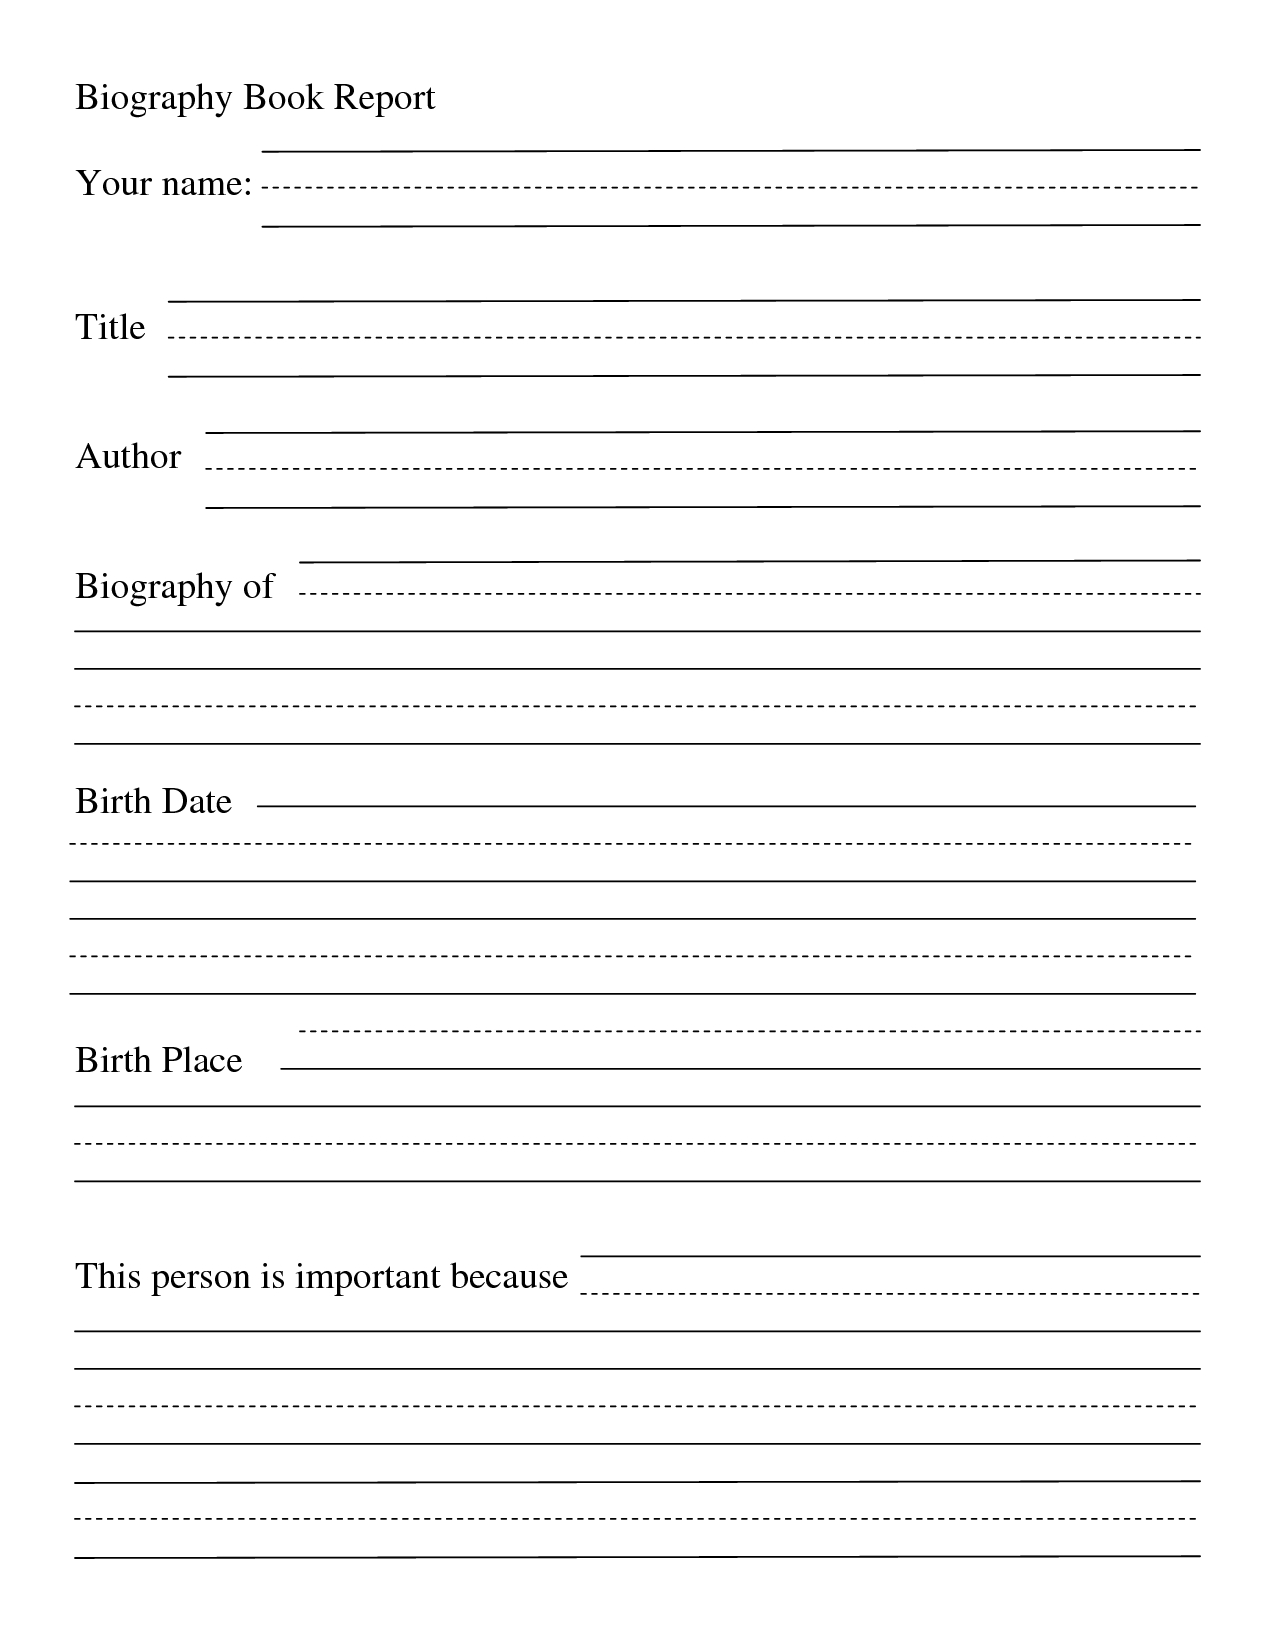 Book Report Outline | Biography Book Report Your Name Title In Biography Book Report Template